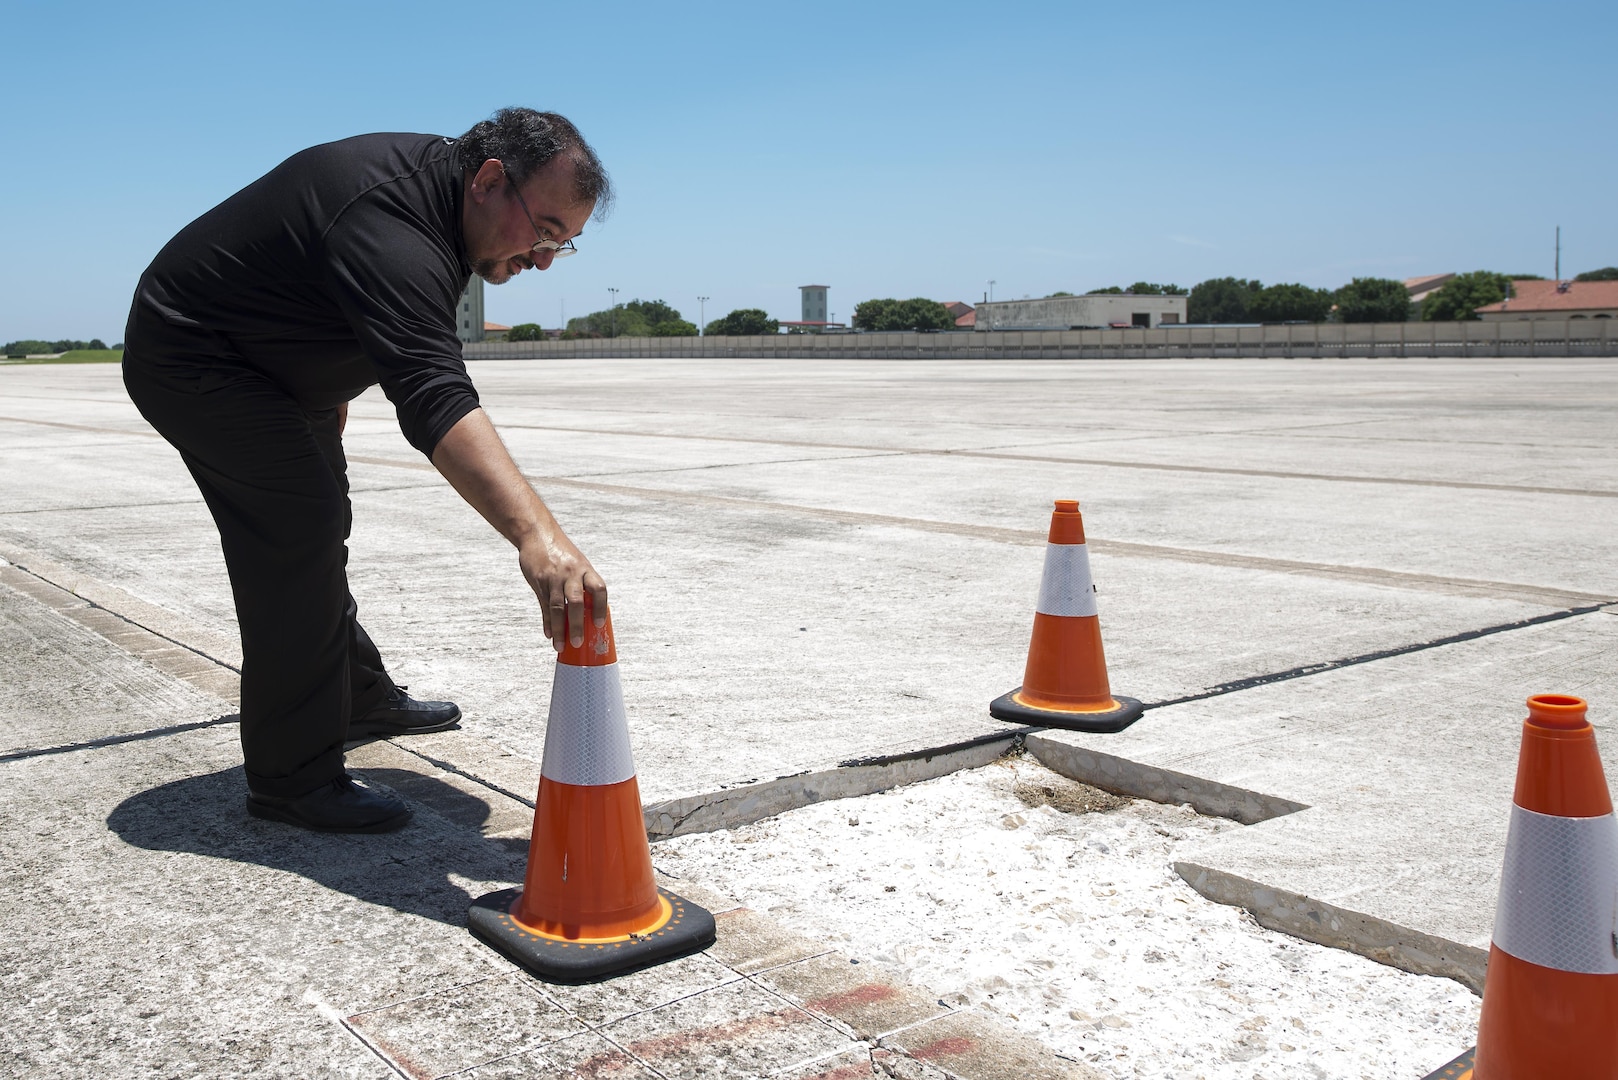 Jack Syers, 12th Operations Support Squadron airfield management operations manager, examines a damaged area of concrete on the flightline during an airfield inspection at Joint Base San Antonio-Randolph June 16, 2016. During airfield inspections, Syers ensures areas of concrete that are cracked or in need of repair are properly marked, as well as surveys for FOD, or foreign object debris.